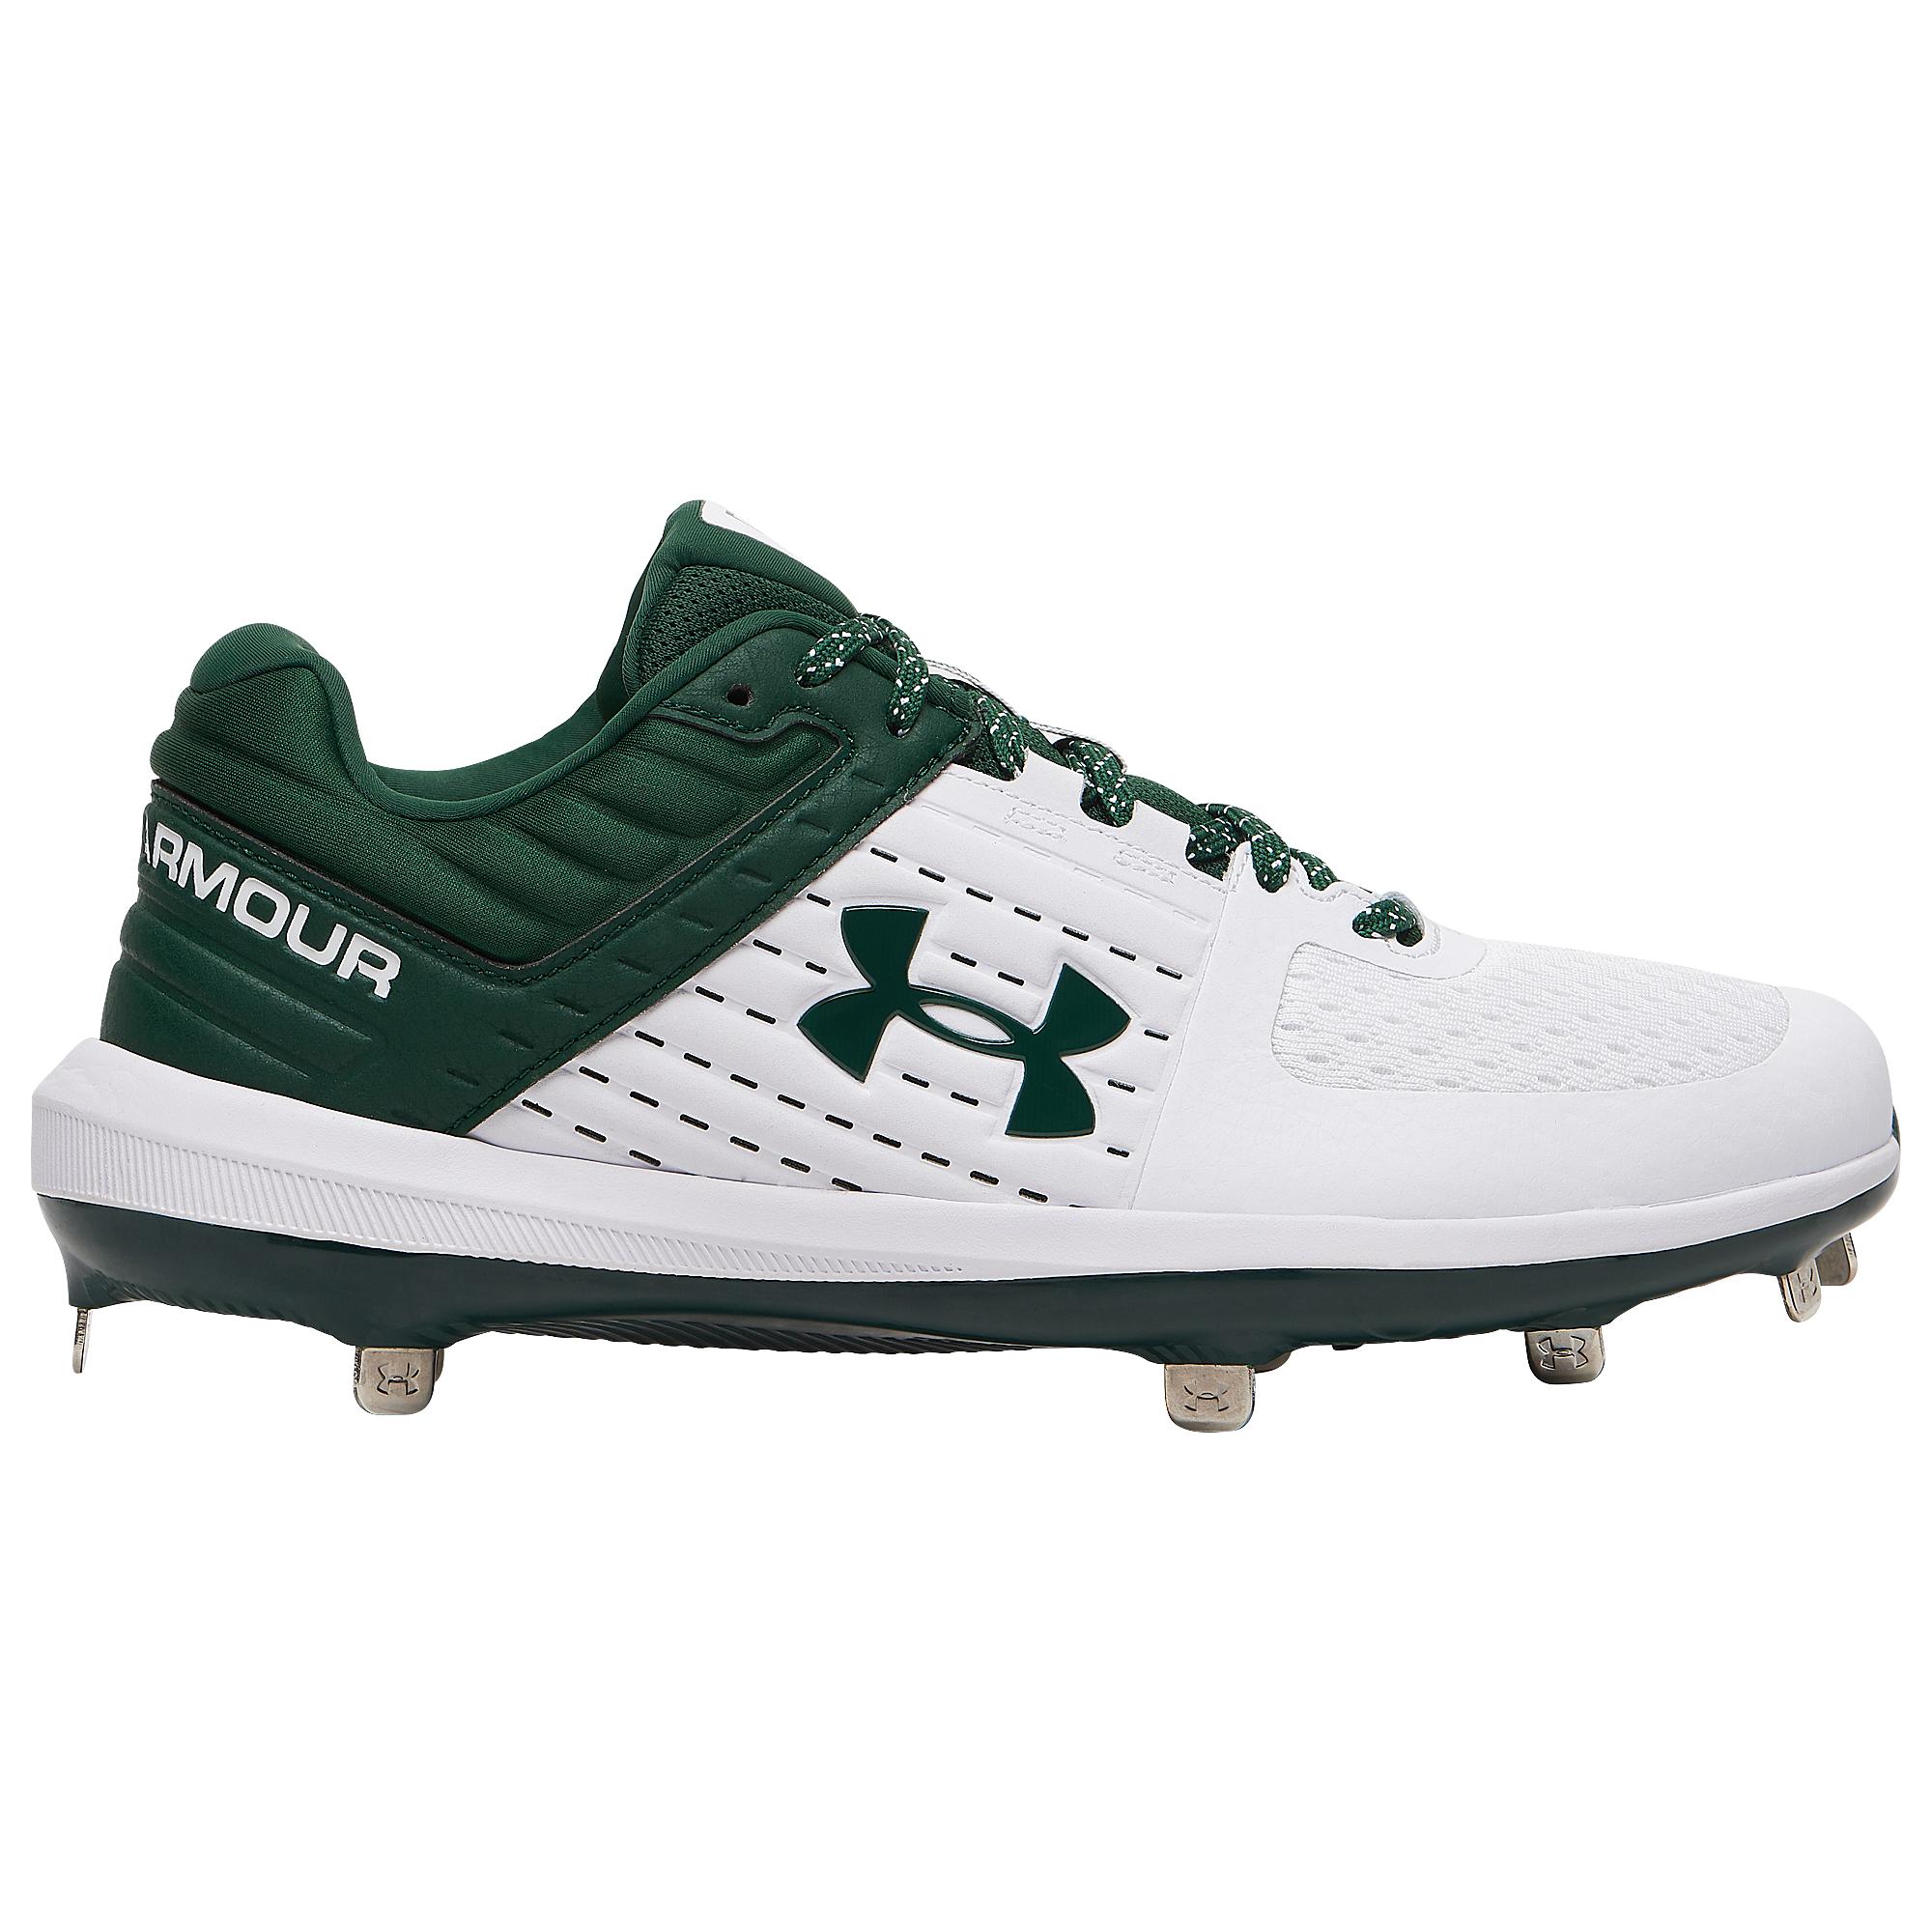 under armour men's yard low st baseball cleat